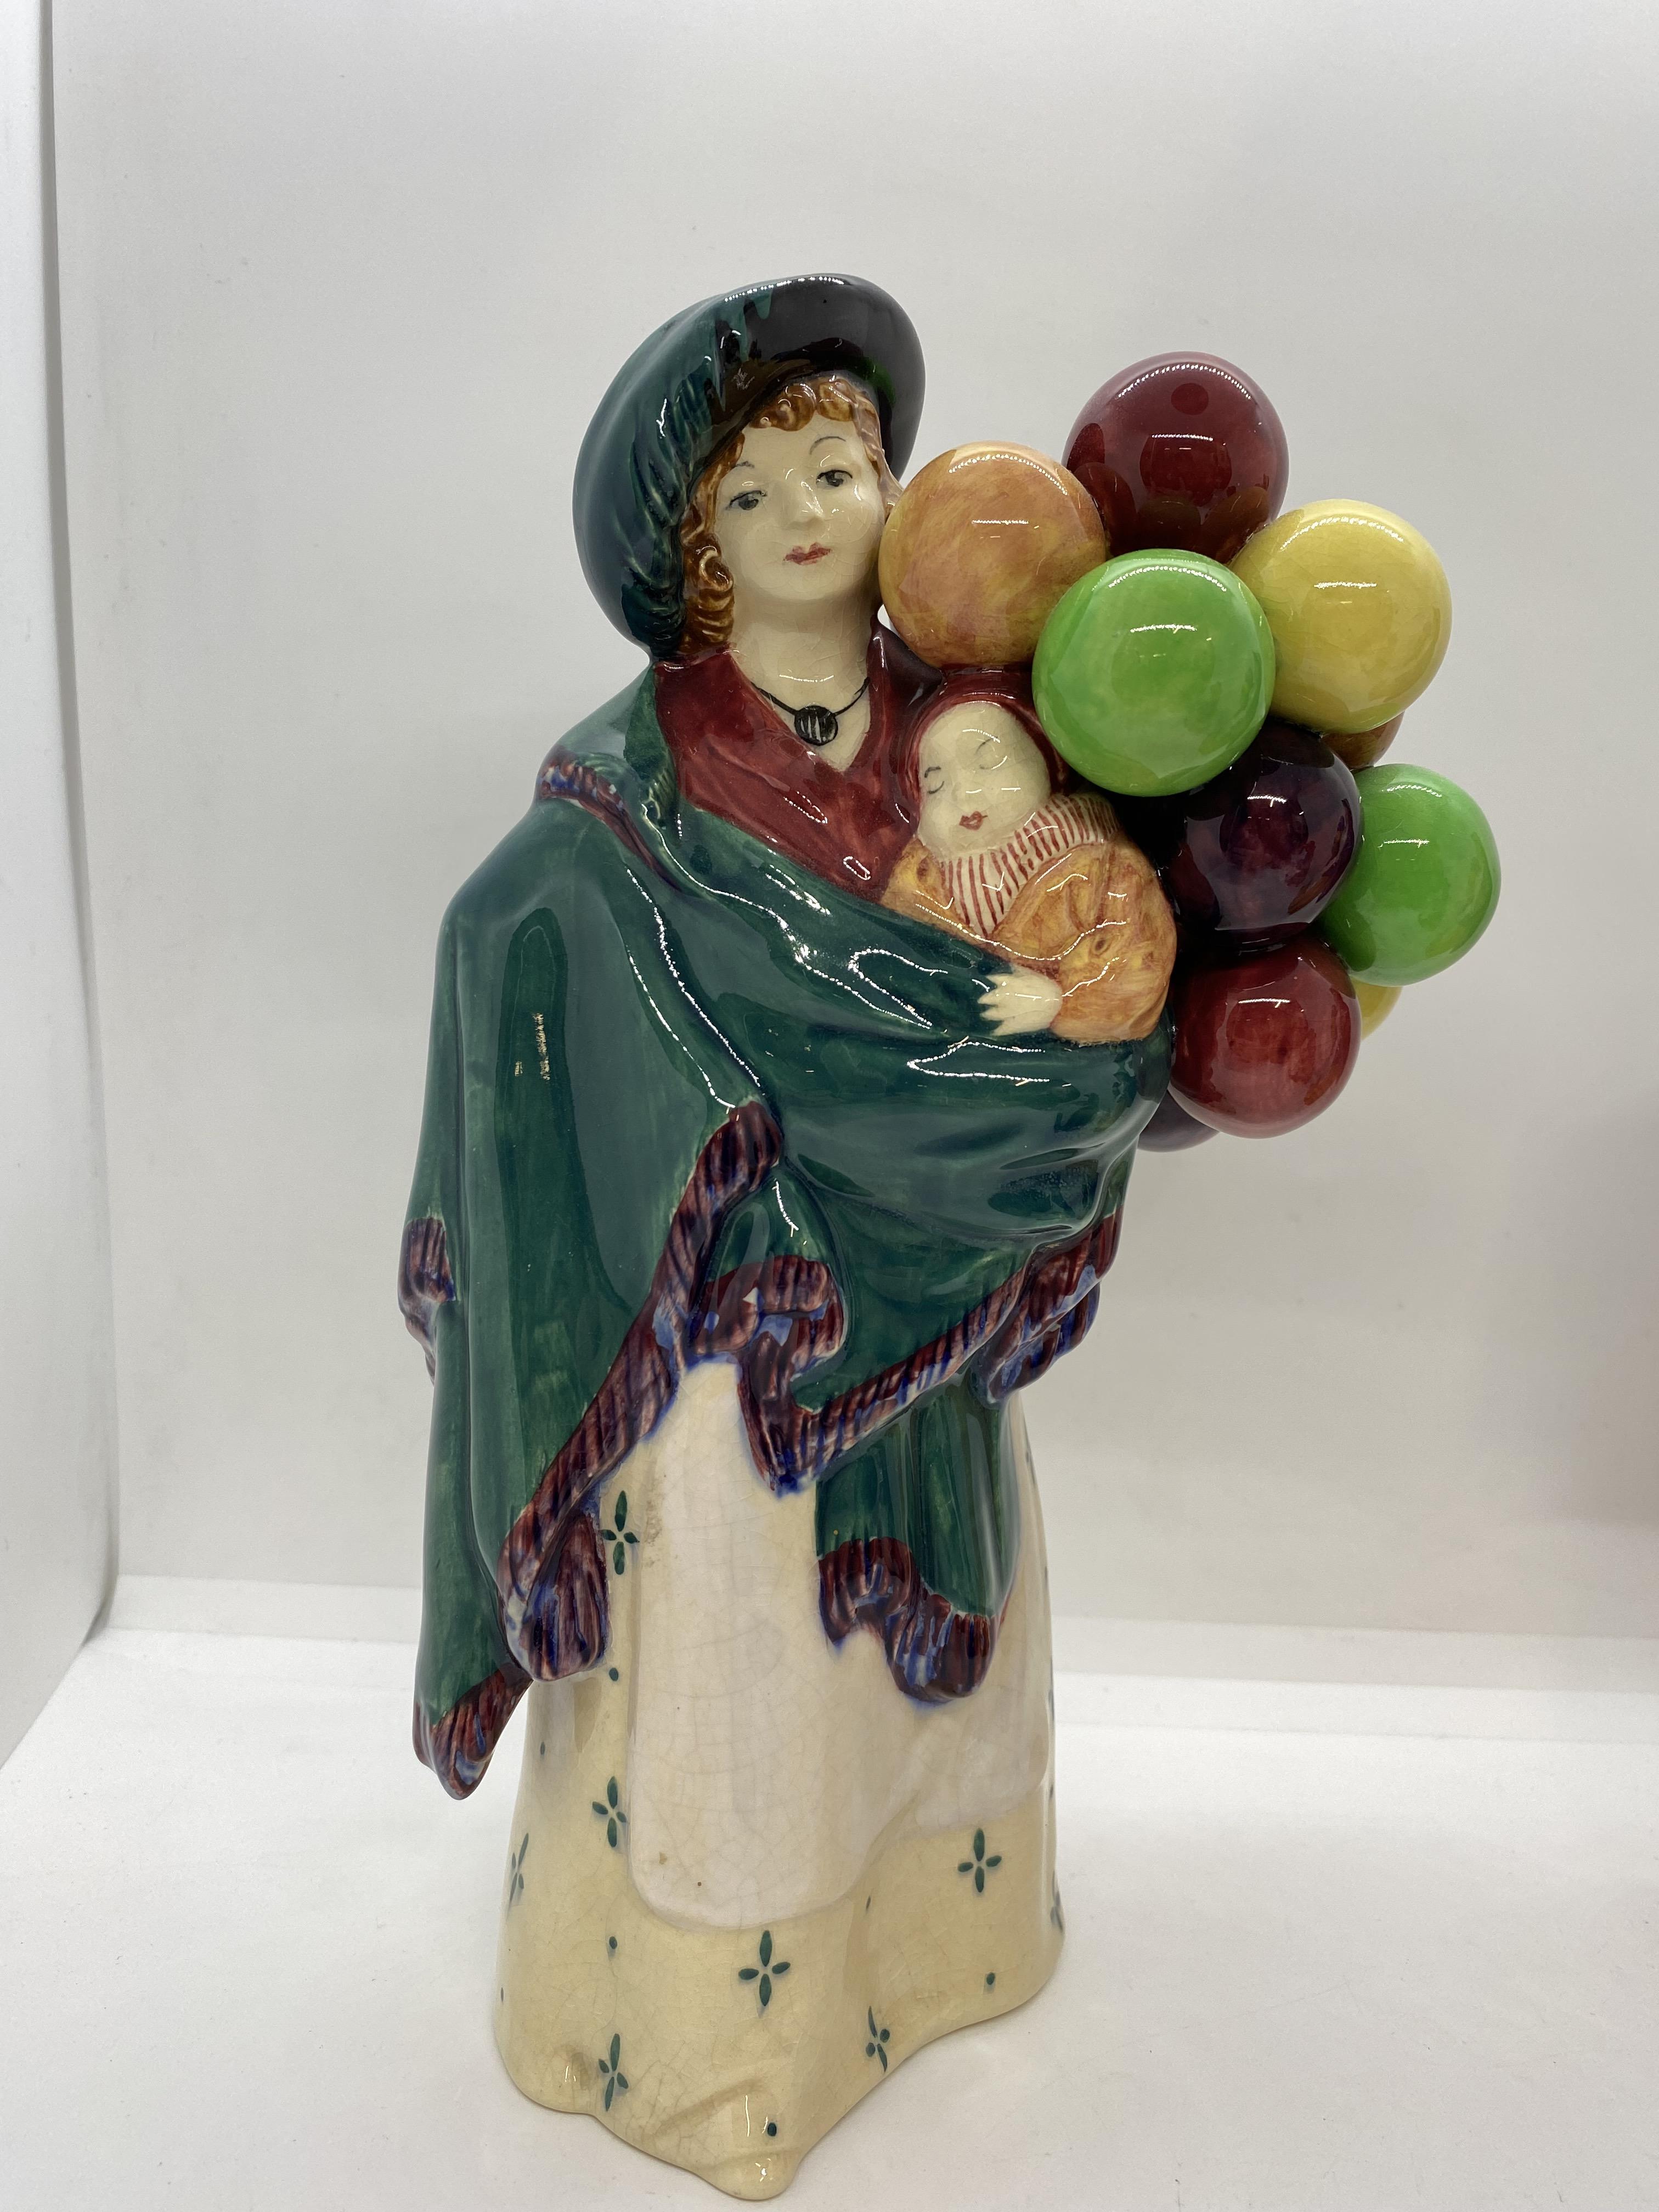 Royal Doulton figures of Balloon sellers/silk & ribbon figures - model nos. H.N 583, 1954, 2935, - Image 3 of 4